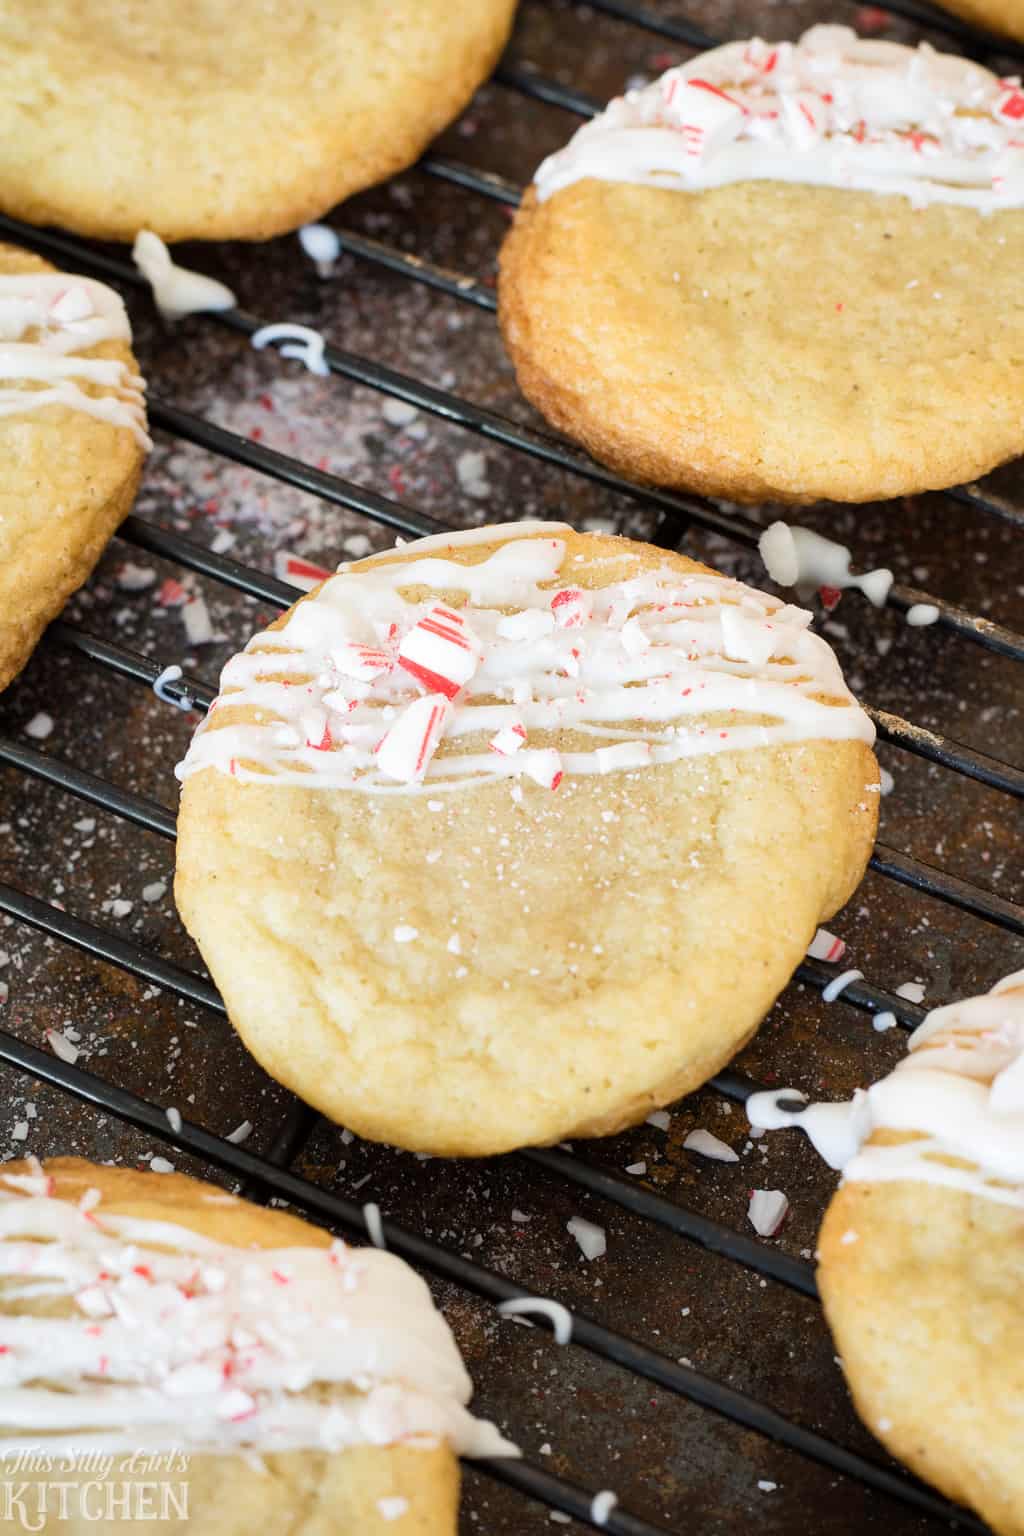 White Chocolate Peppermint Sugar Cookies, classic chewy soft sugar cookies drizzled with white chocolate and crushed peppermint! #Recipe from ThisSillyGirlsKitchen.com #sugarcookies #ChristmasCookies #peppermint #whitechocolate